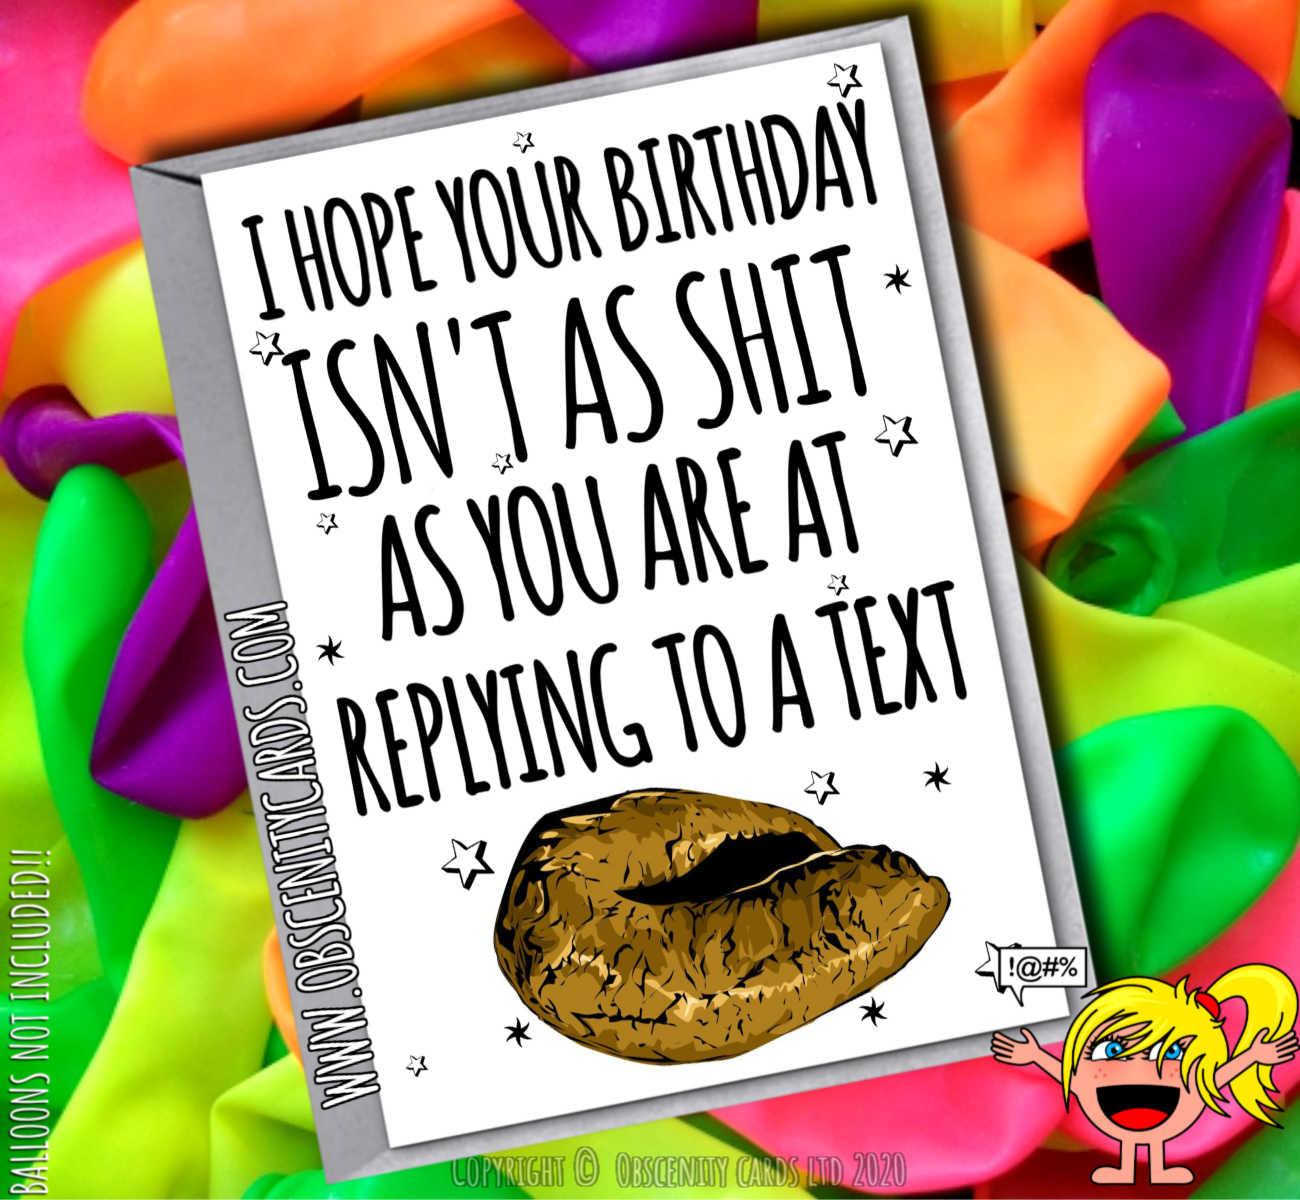 HOPE YOUR BIRTHDAY ISN'T AS SHIT AS YOU ARE AT REPLYING TO A TEXT